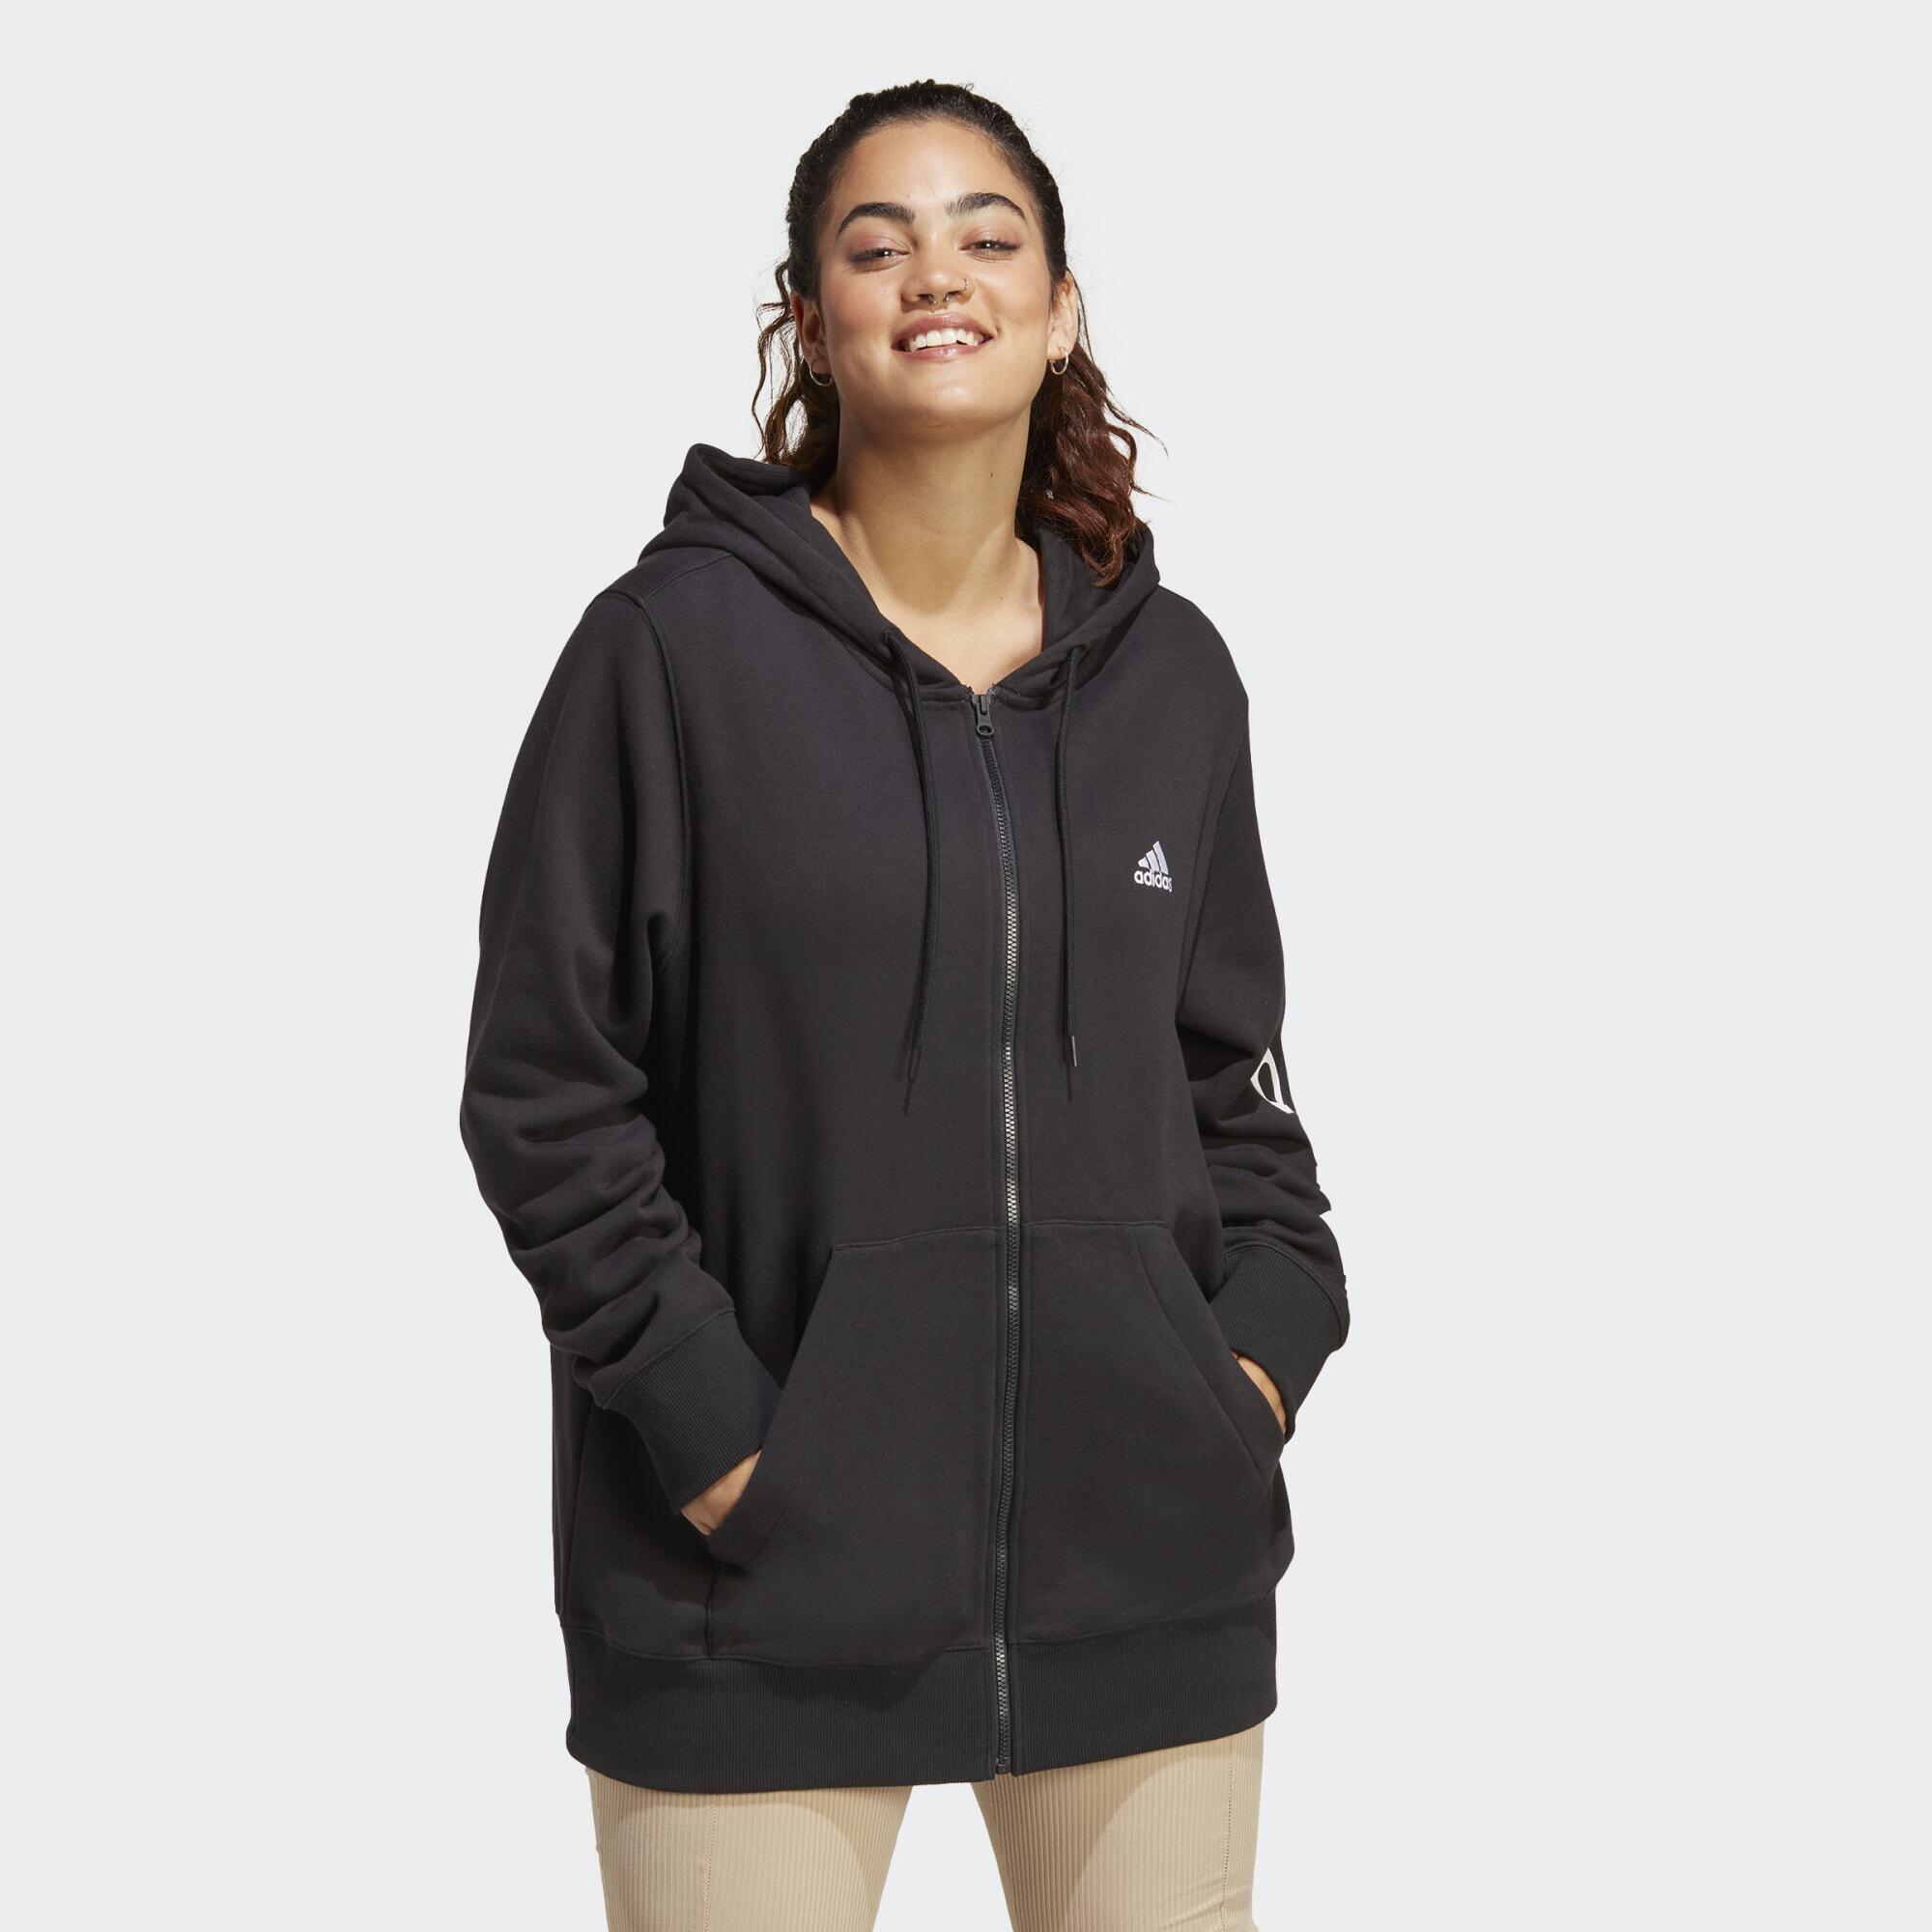 Essentials Linear Full-Zip French Terry Hoodie (Plus Size) ADIDAS